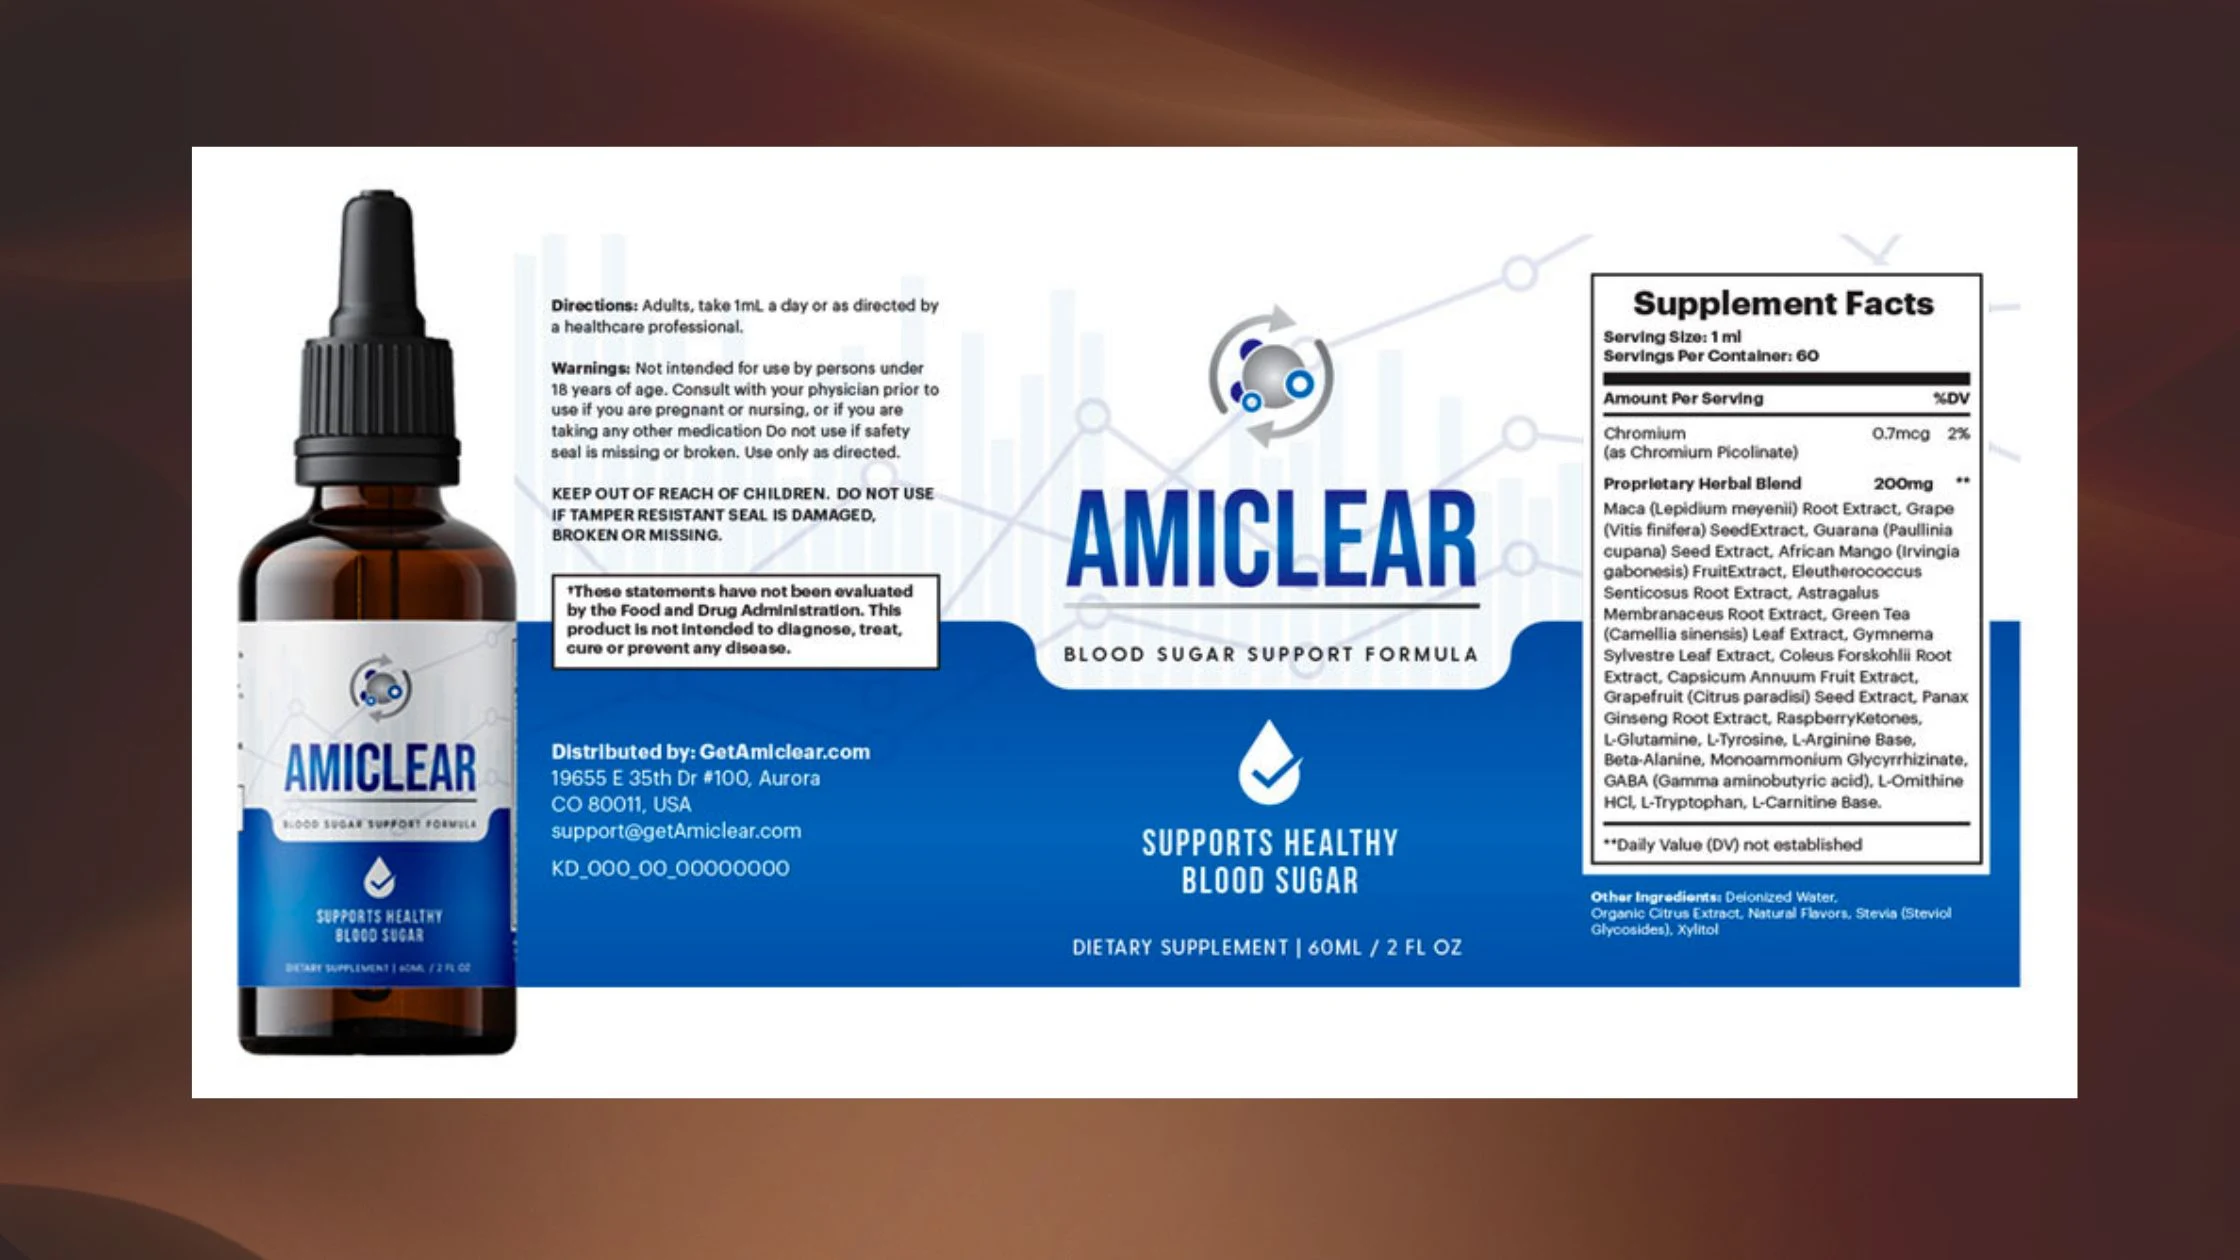 Amiclear supplement facts